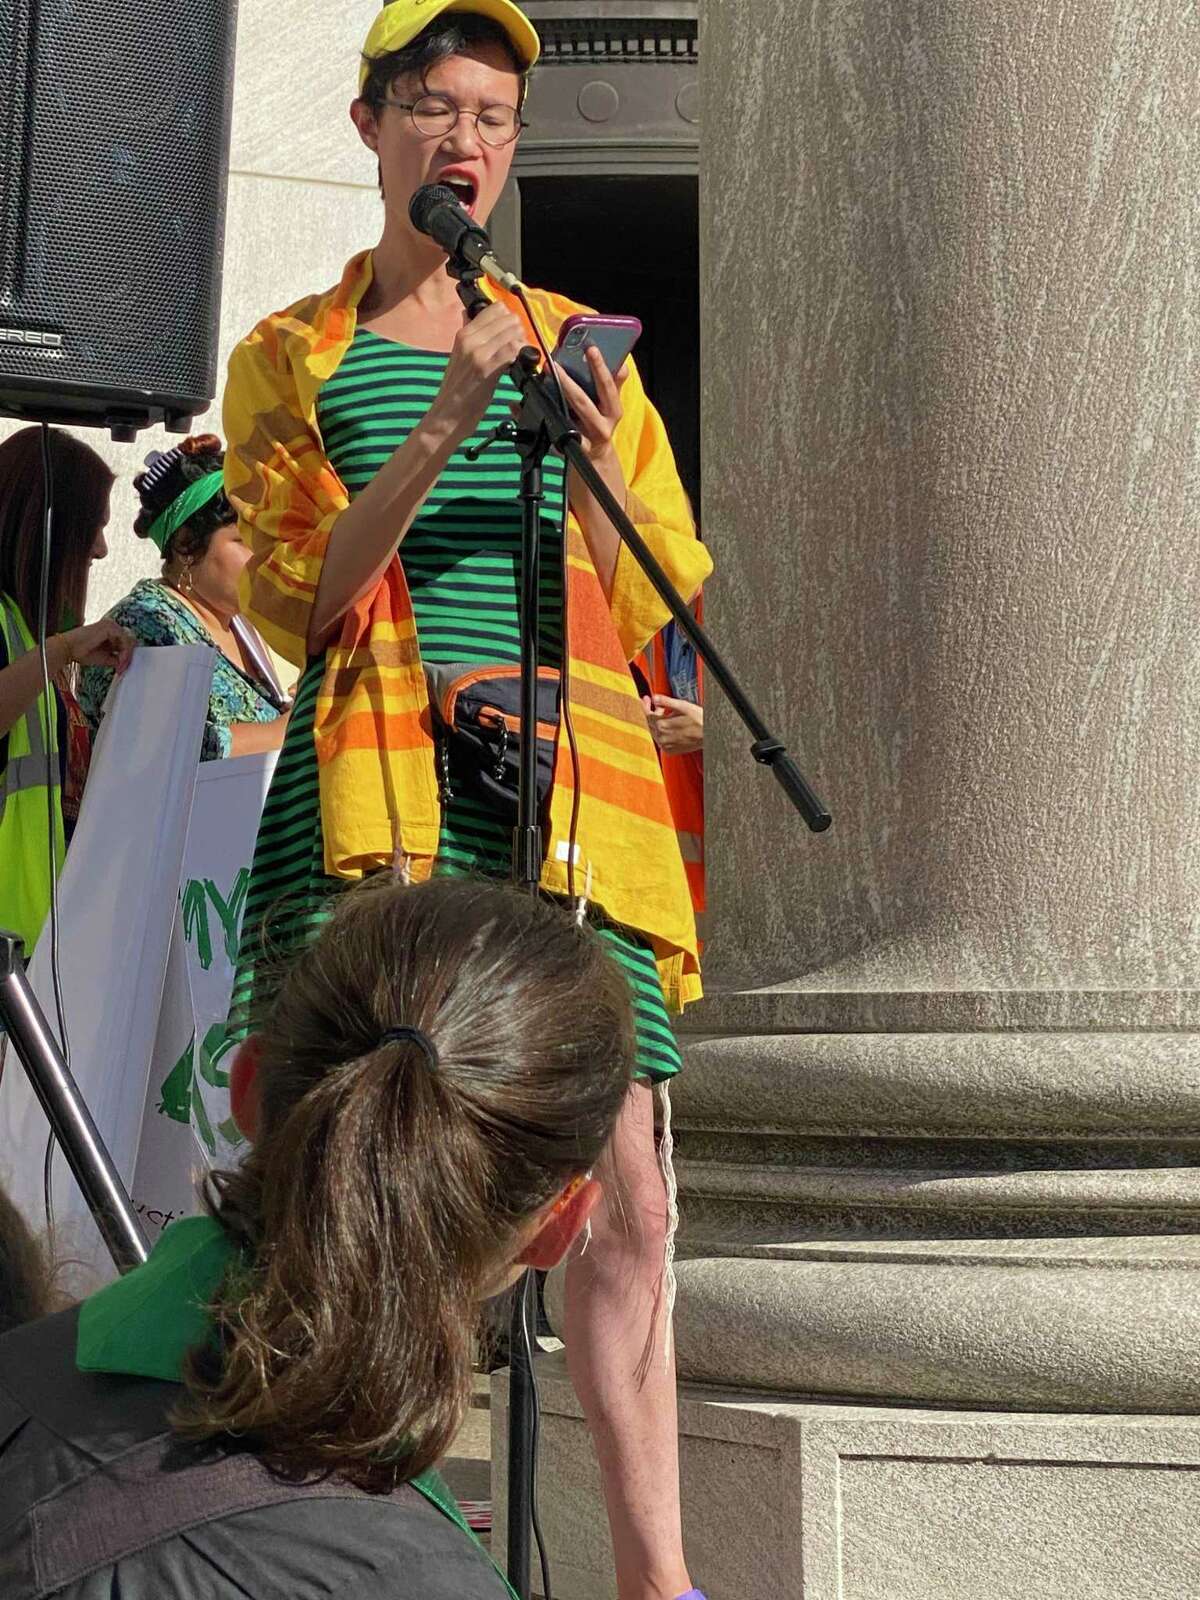 May Ye, a rabbinical intern with Mending Minyan, an anti-Zionist Jewish congregation, speaks at a protest of the Supreme Court’s Roe v. Wade decision June 24, 2022.